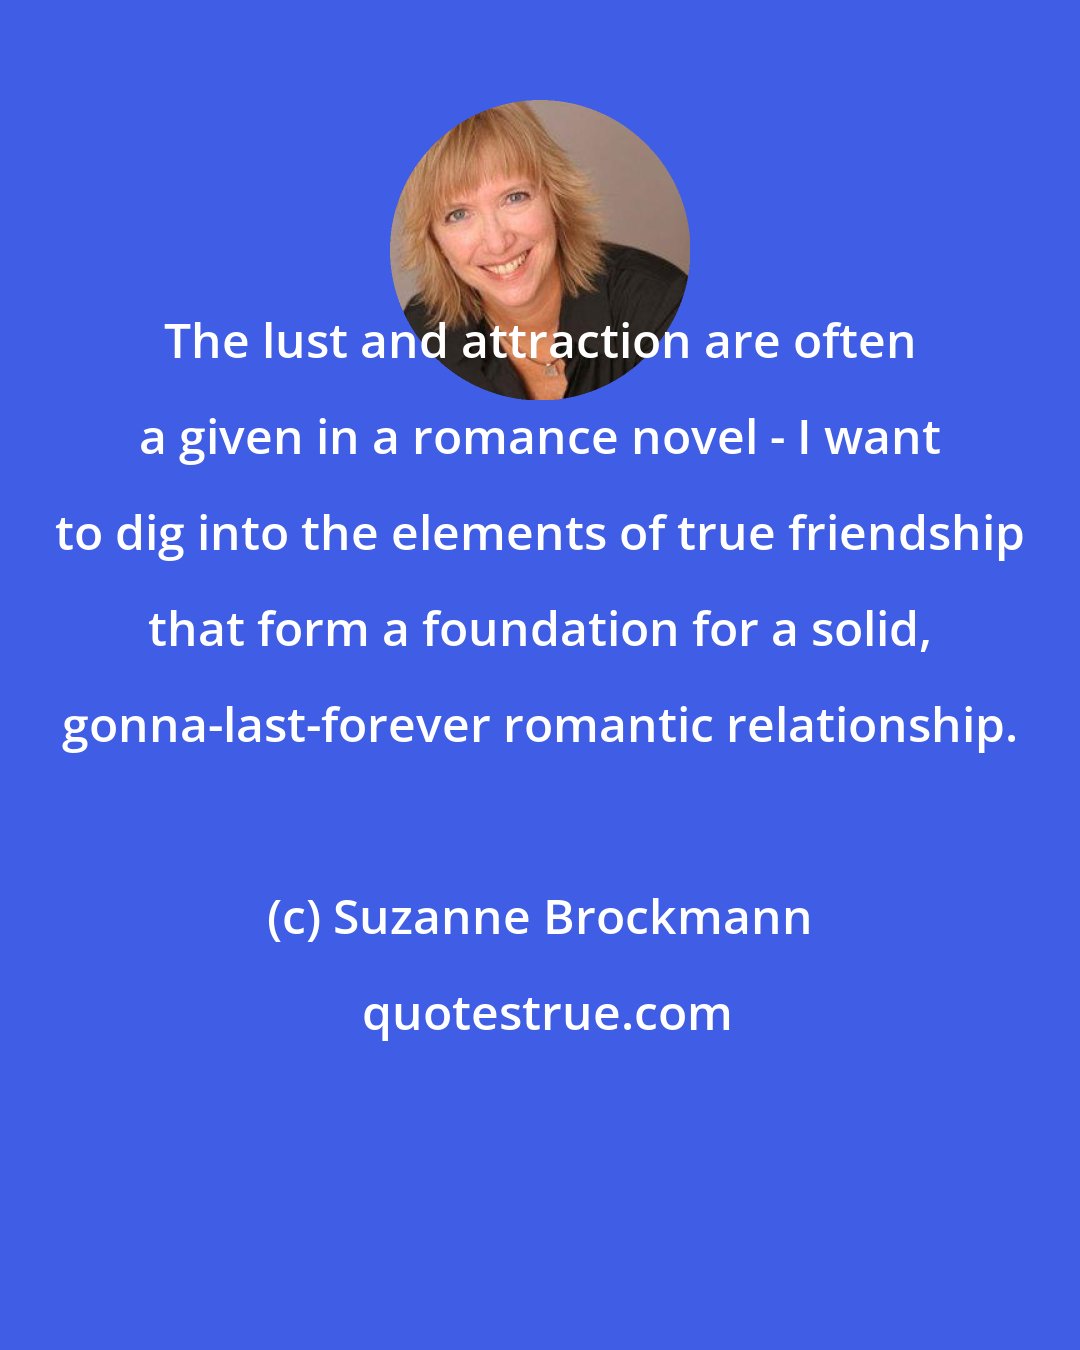 Suzanne Brockmann: The lust and attraction are often a given in a romance novel - I want to dig into the elements of true friendship that form a foundation for a solid, gonna-last-forever romantic relationship.